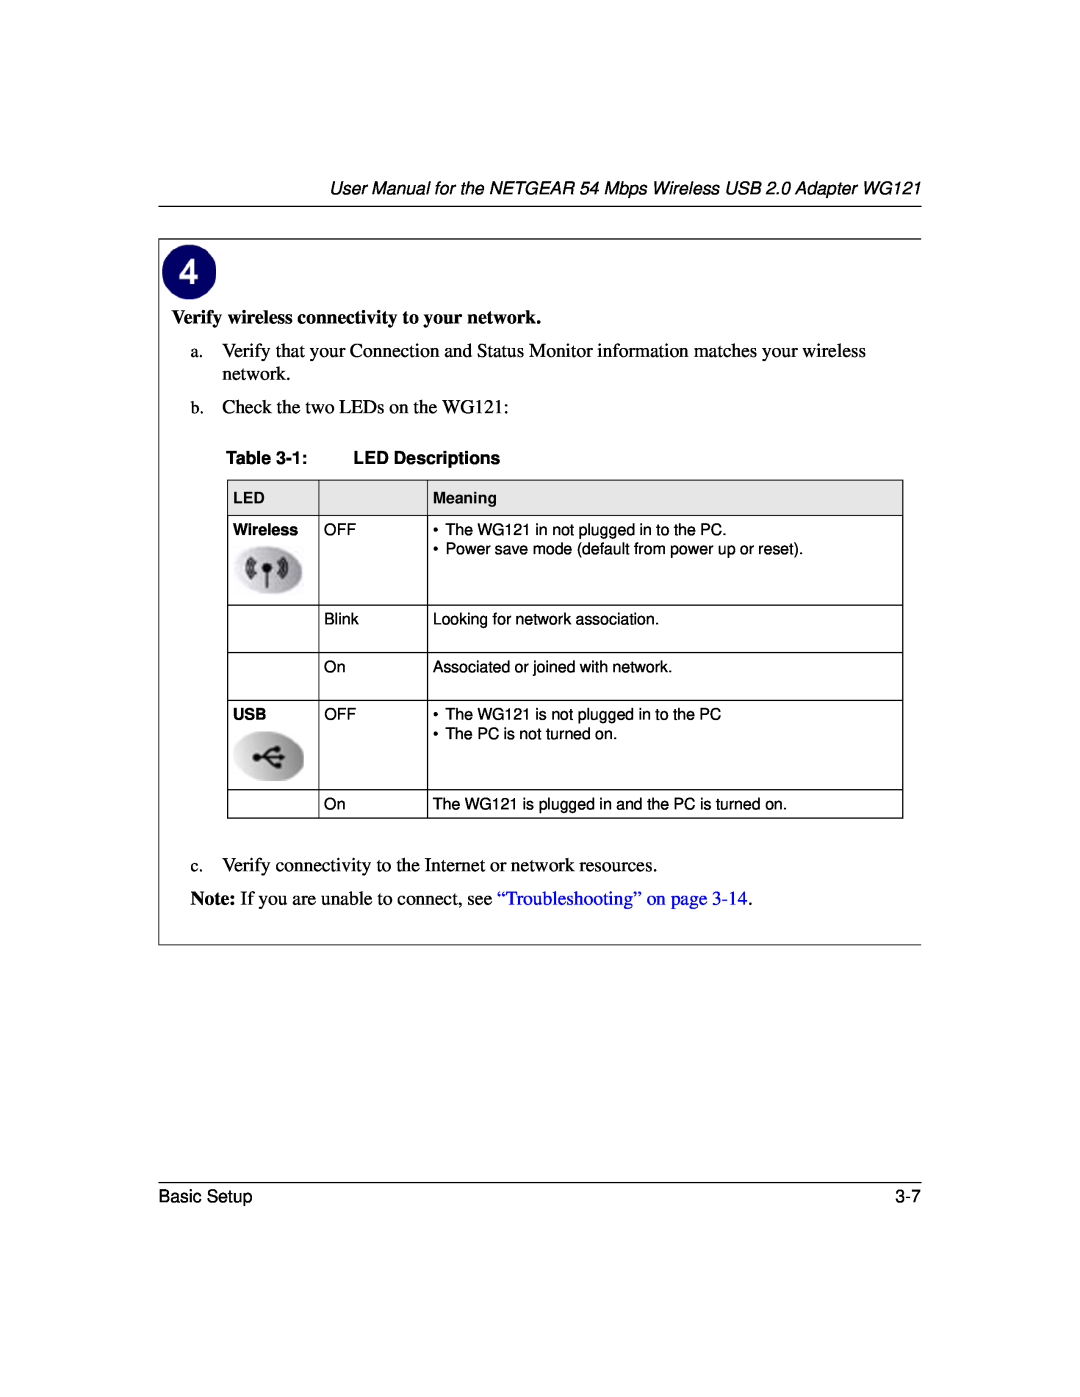 NETGEAR WG121 user manual Verify wireless connectivity to your network 